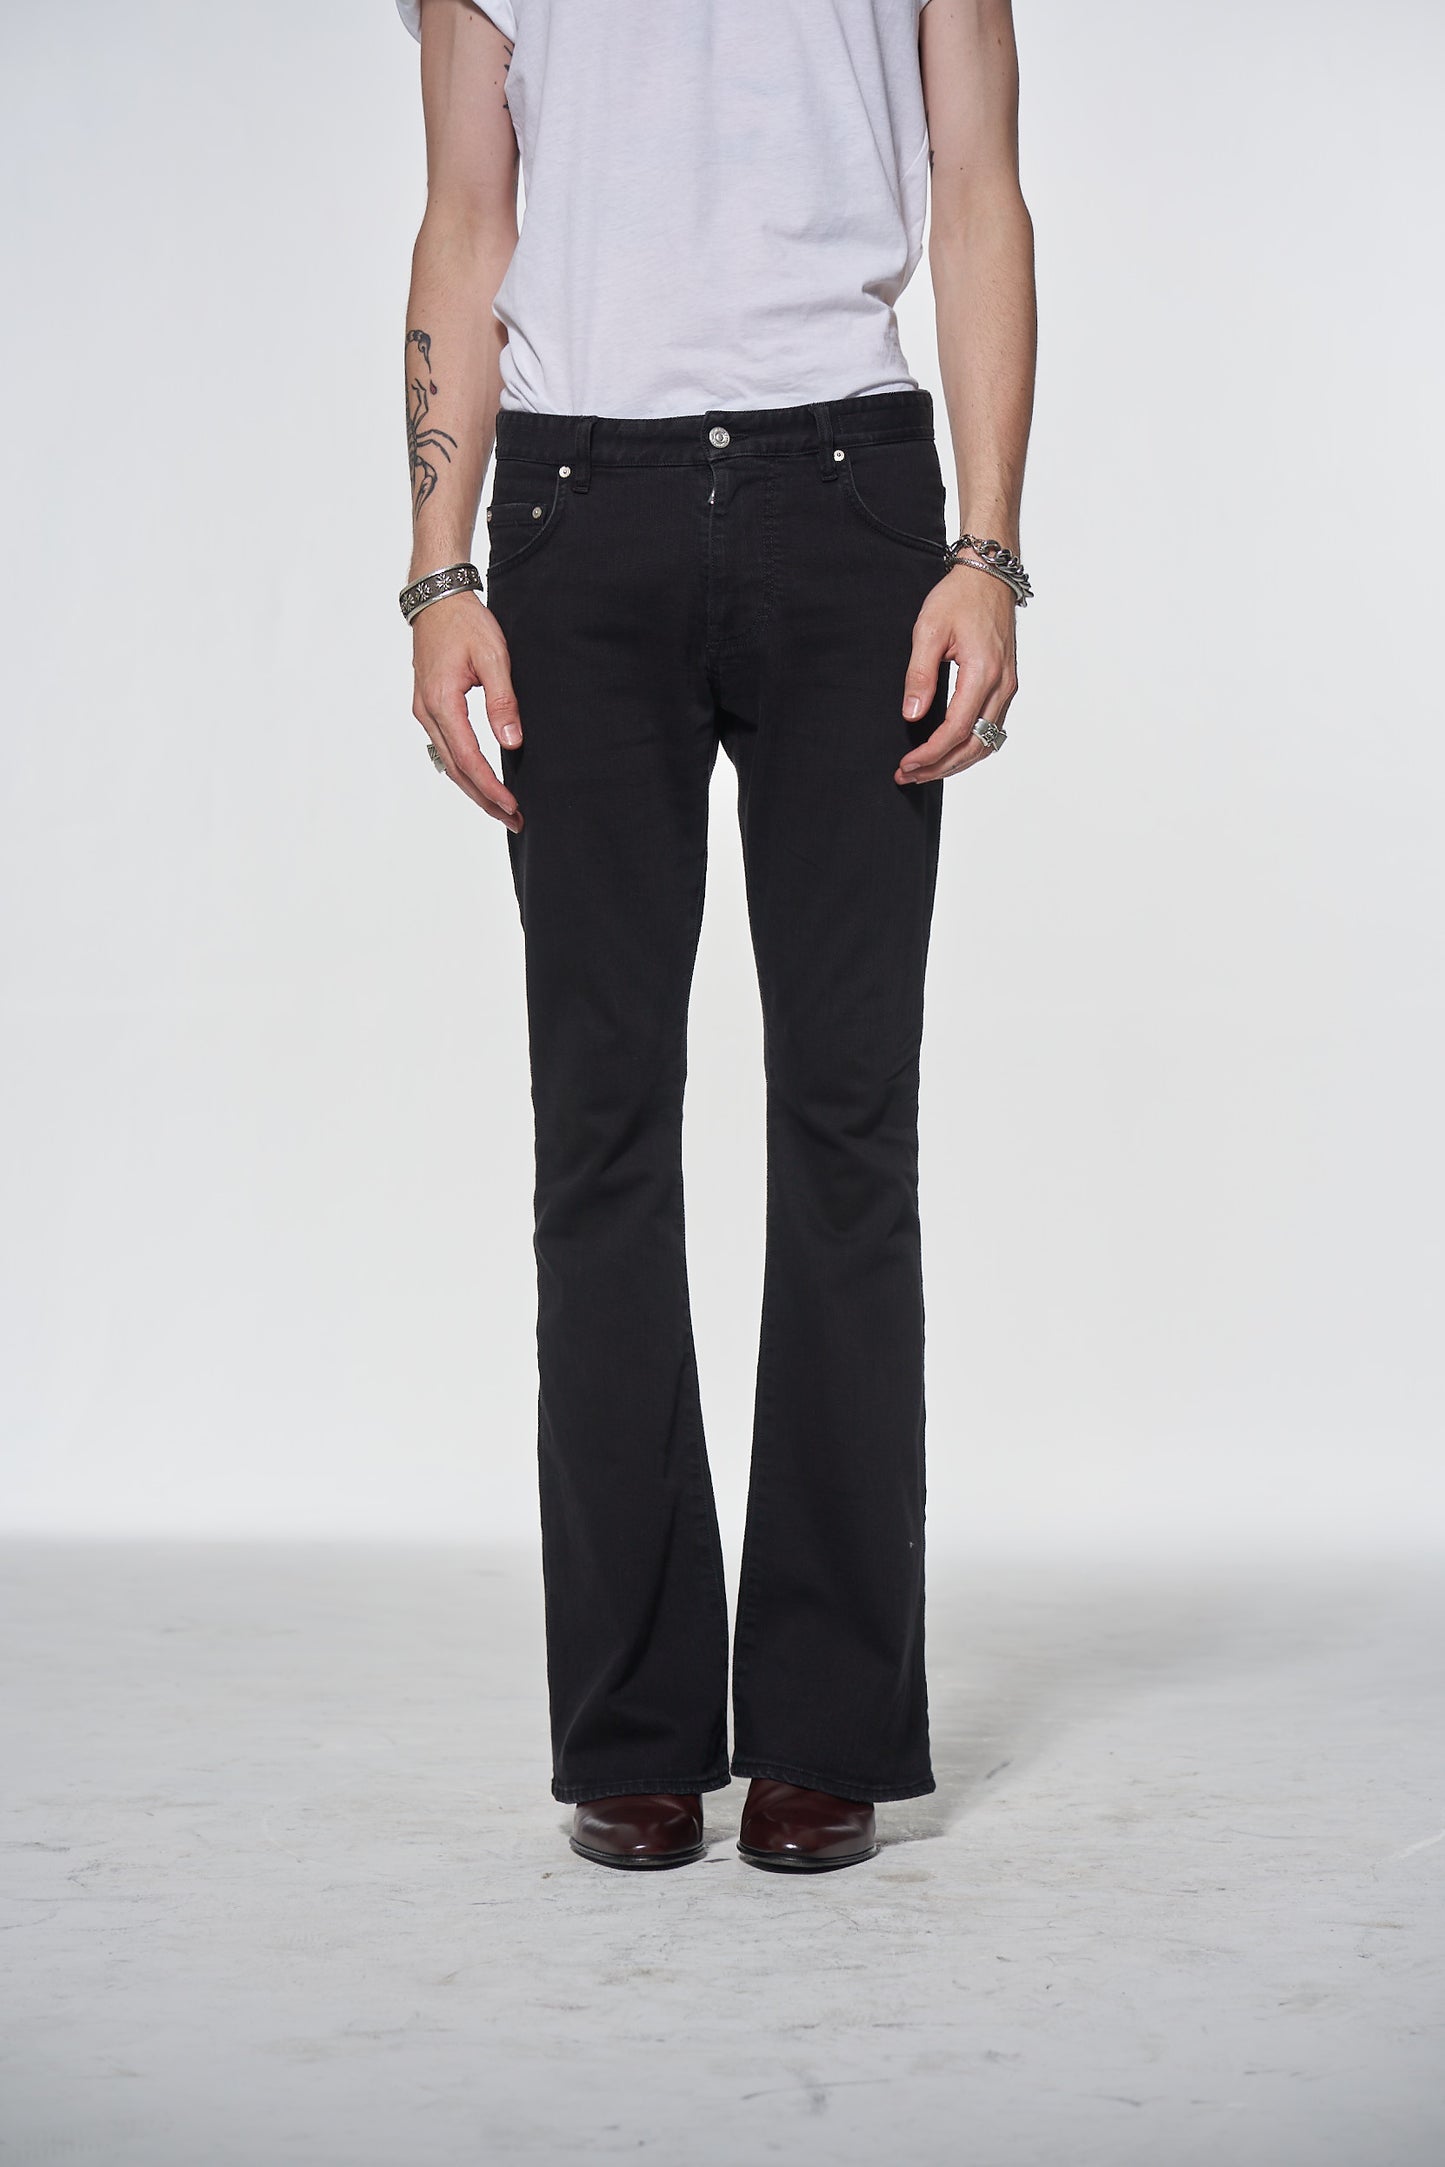 Bell Bottom Jeans – ALELLY